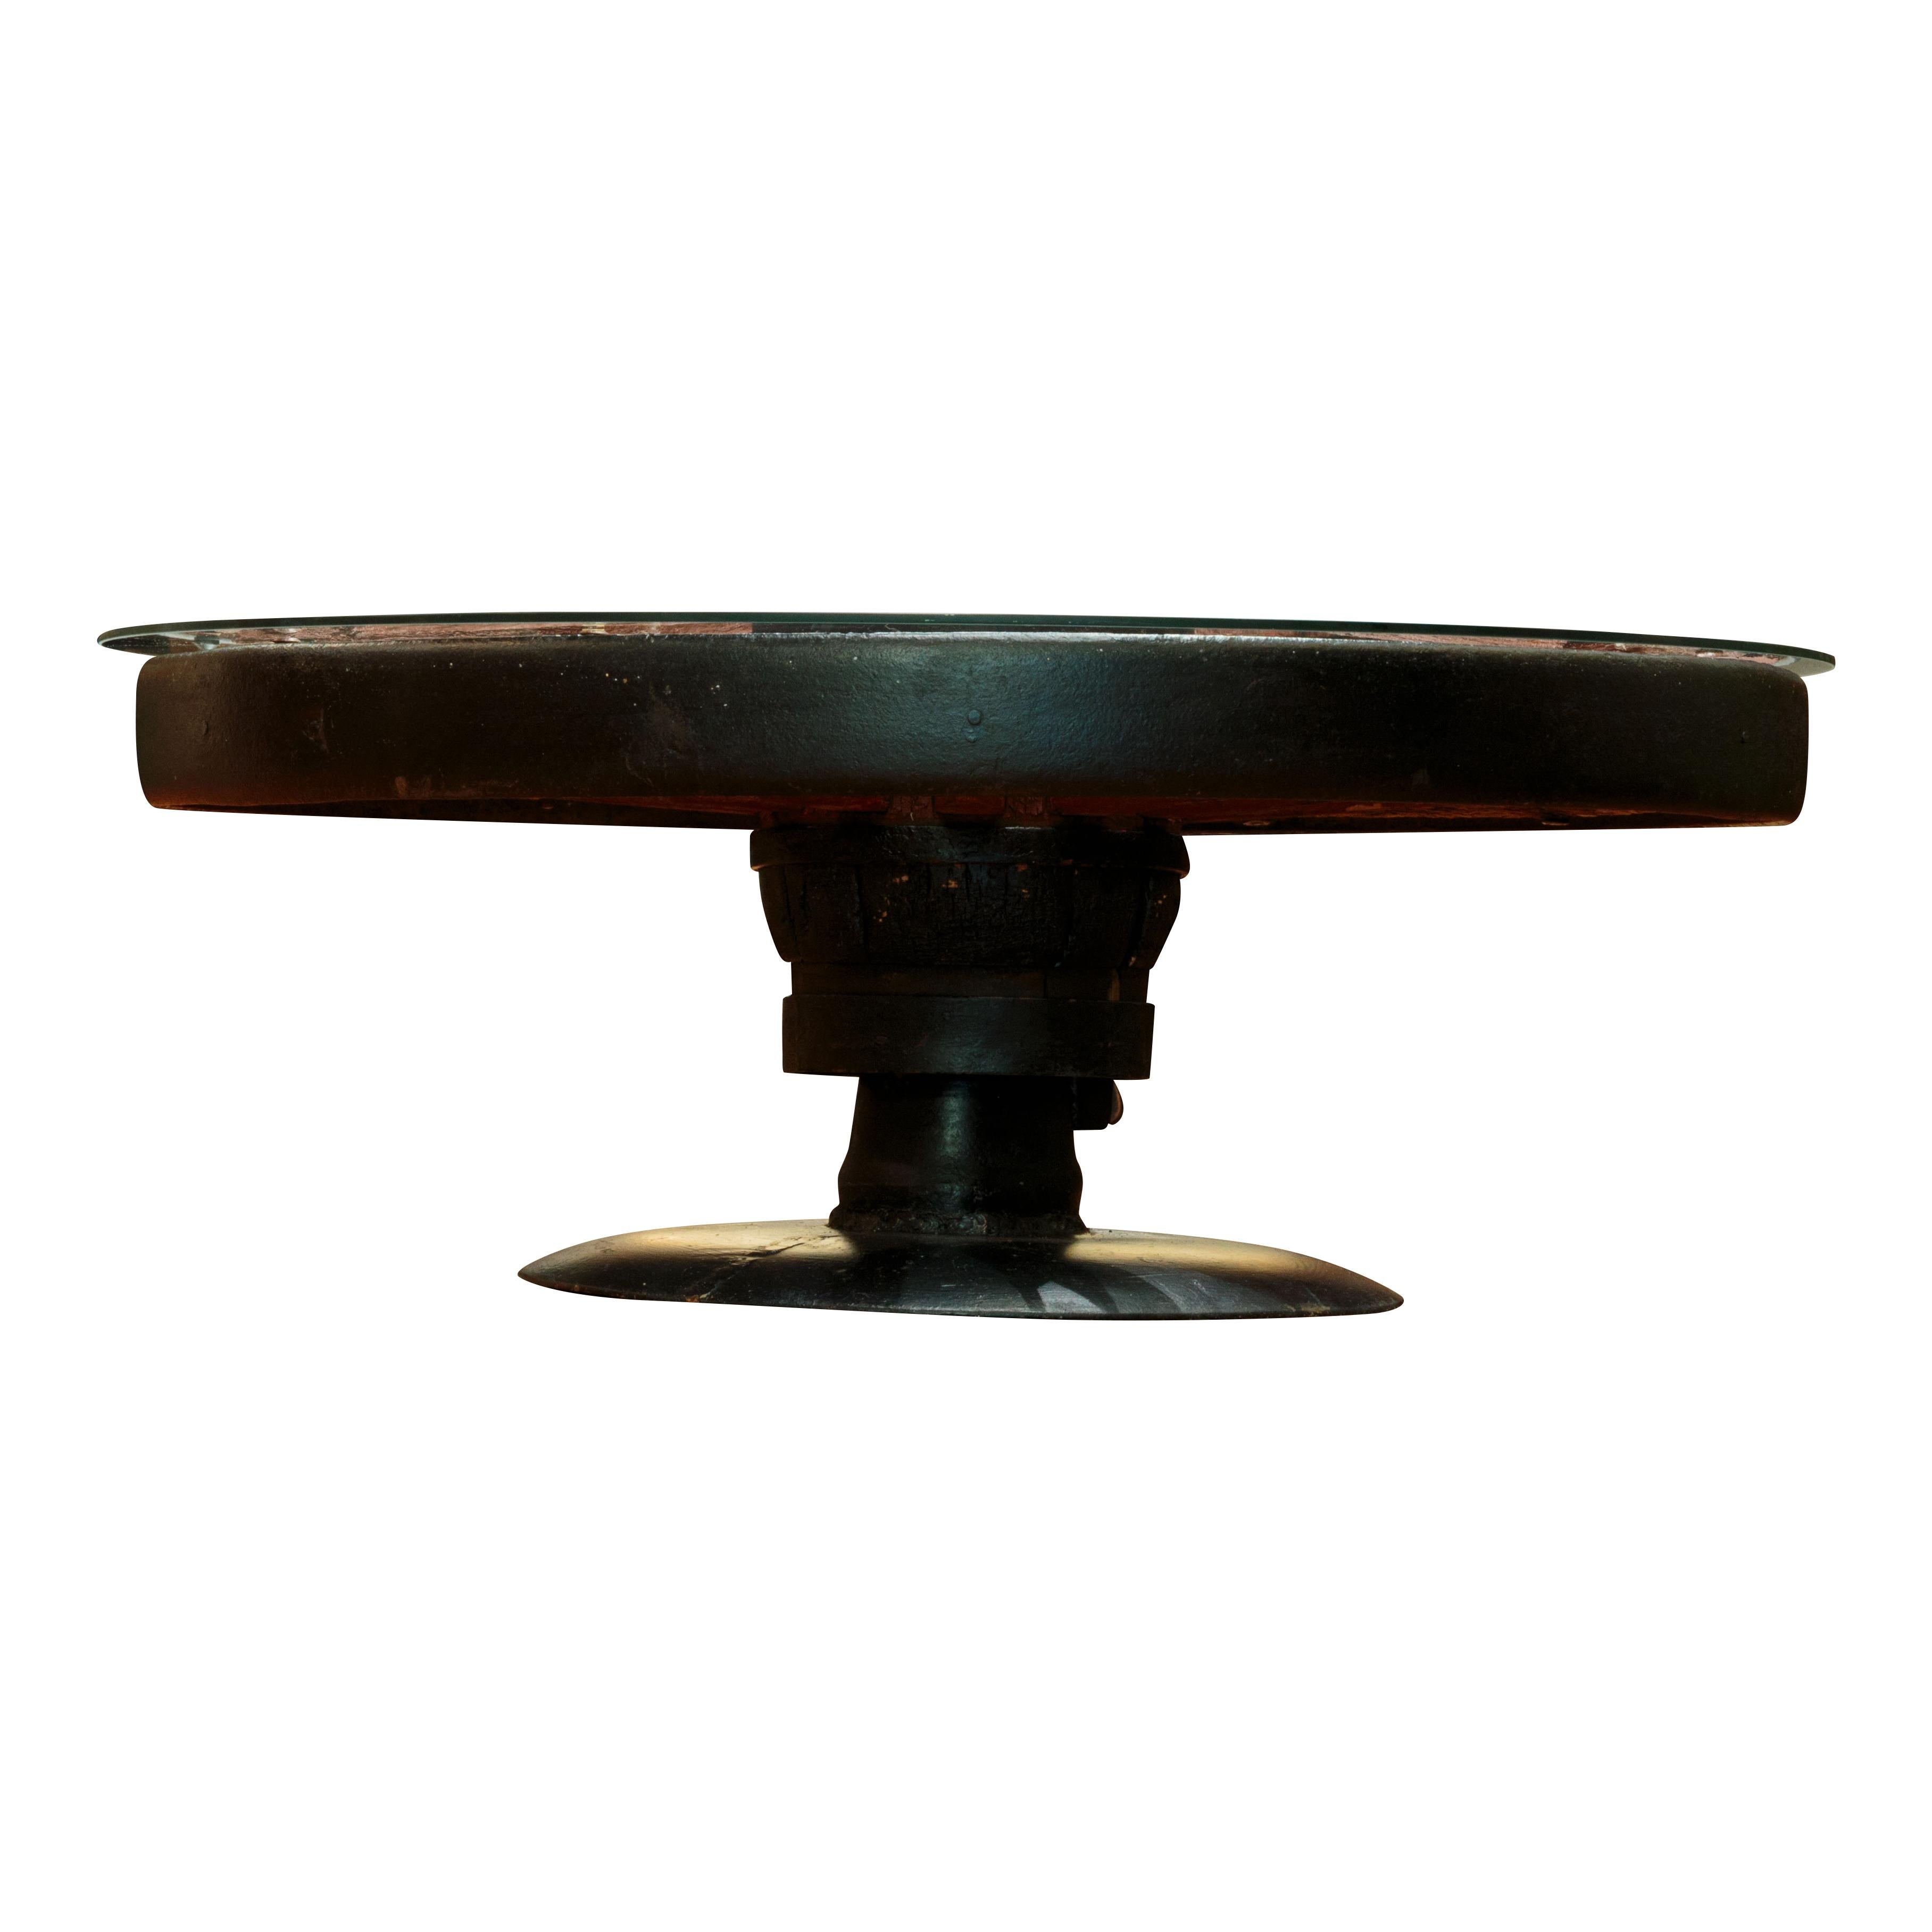 Wagon wheel coffee table with wood hub and iron band, base from horse drawn disk. Nice and authentic. Ships without glass. 

Period: Contemporary
Origin: Northwest
Size: 36